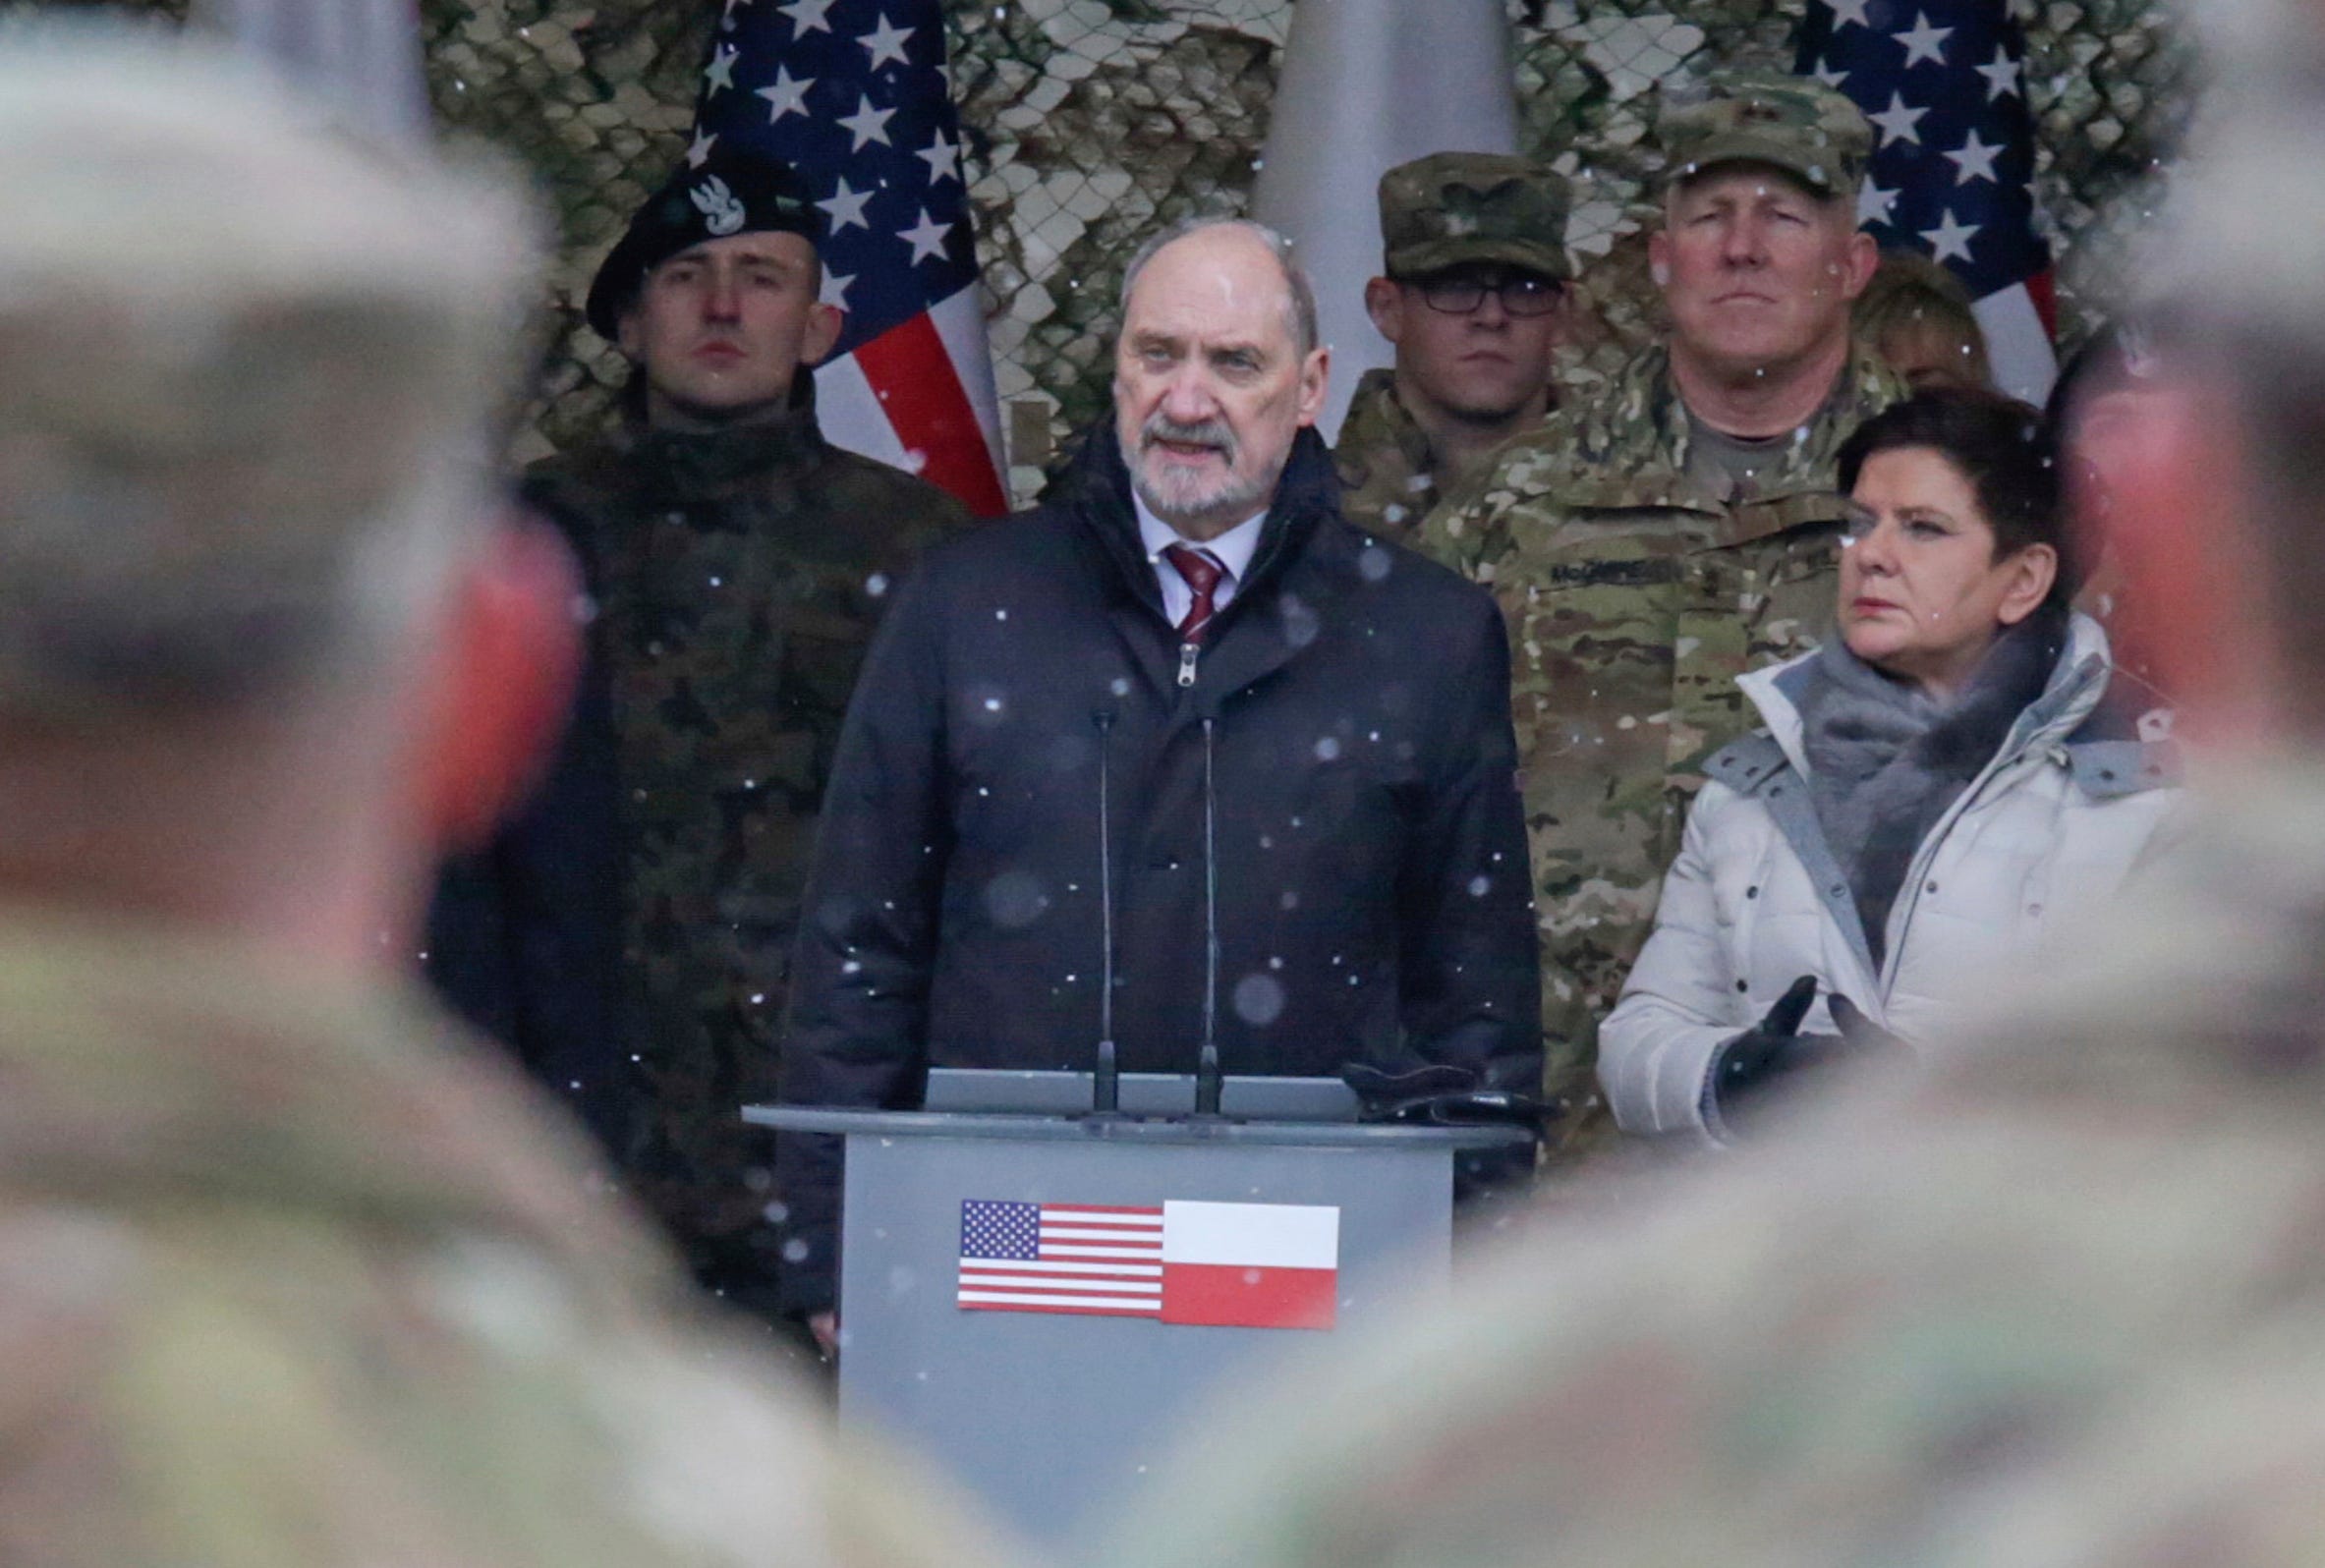 'We waited for decades': Polish leaders hail arrival of U.S. troops